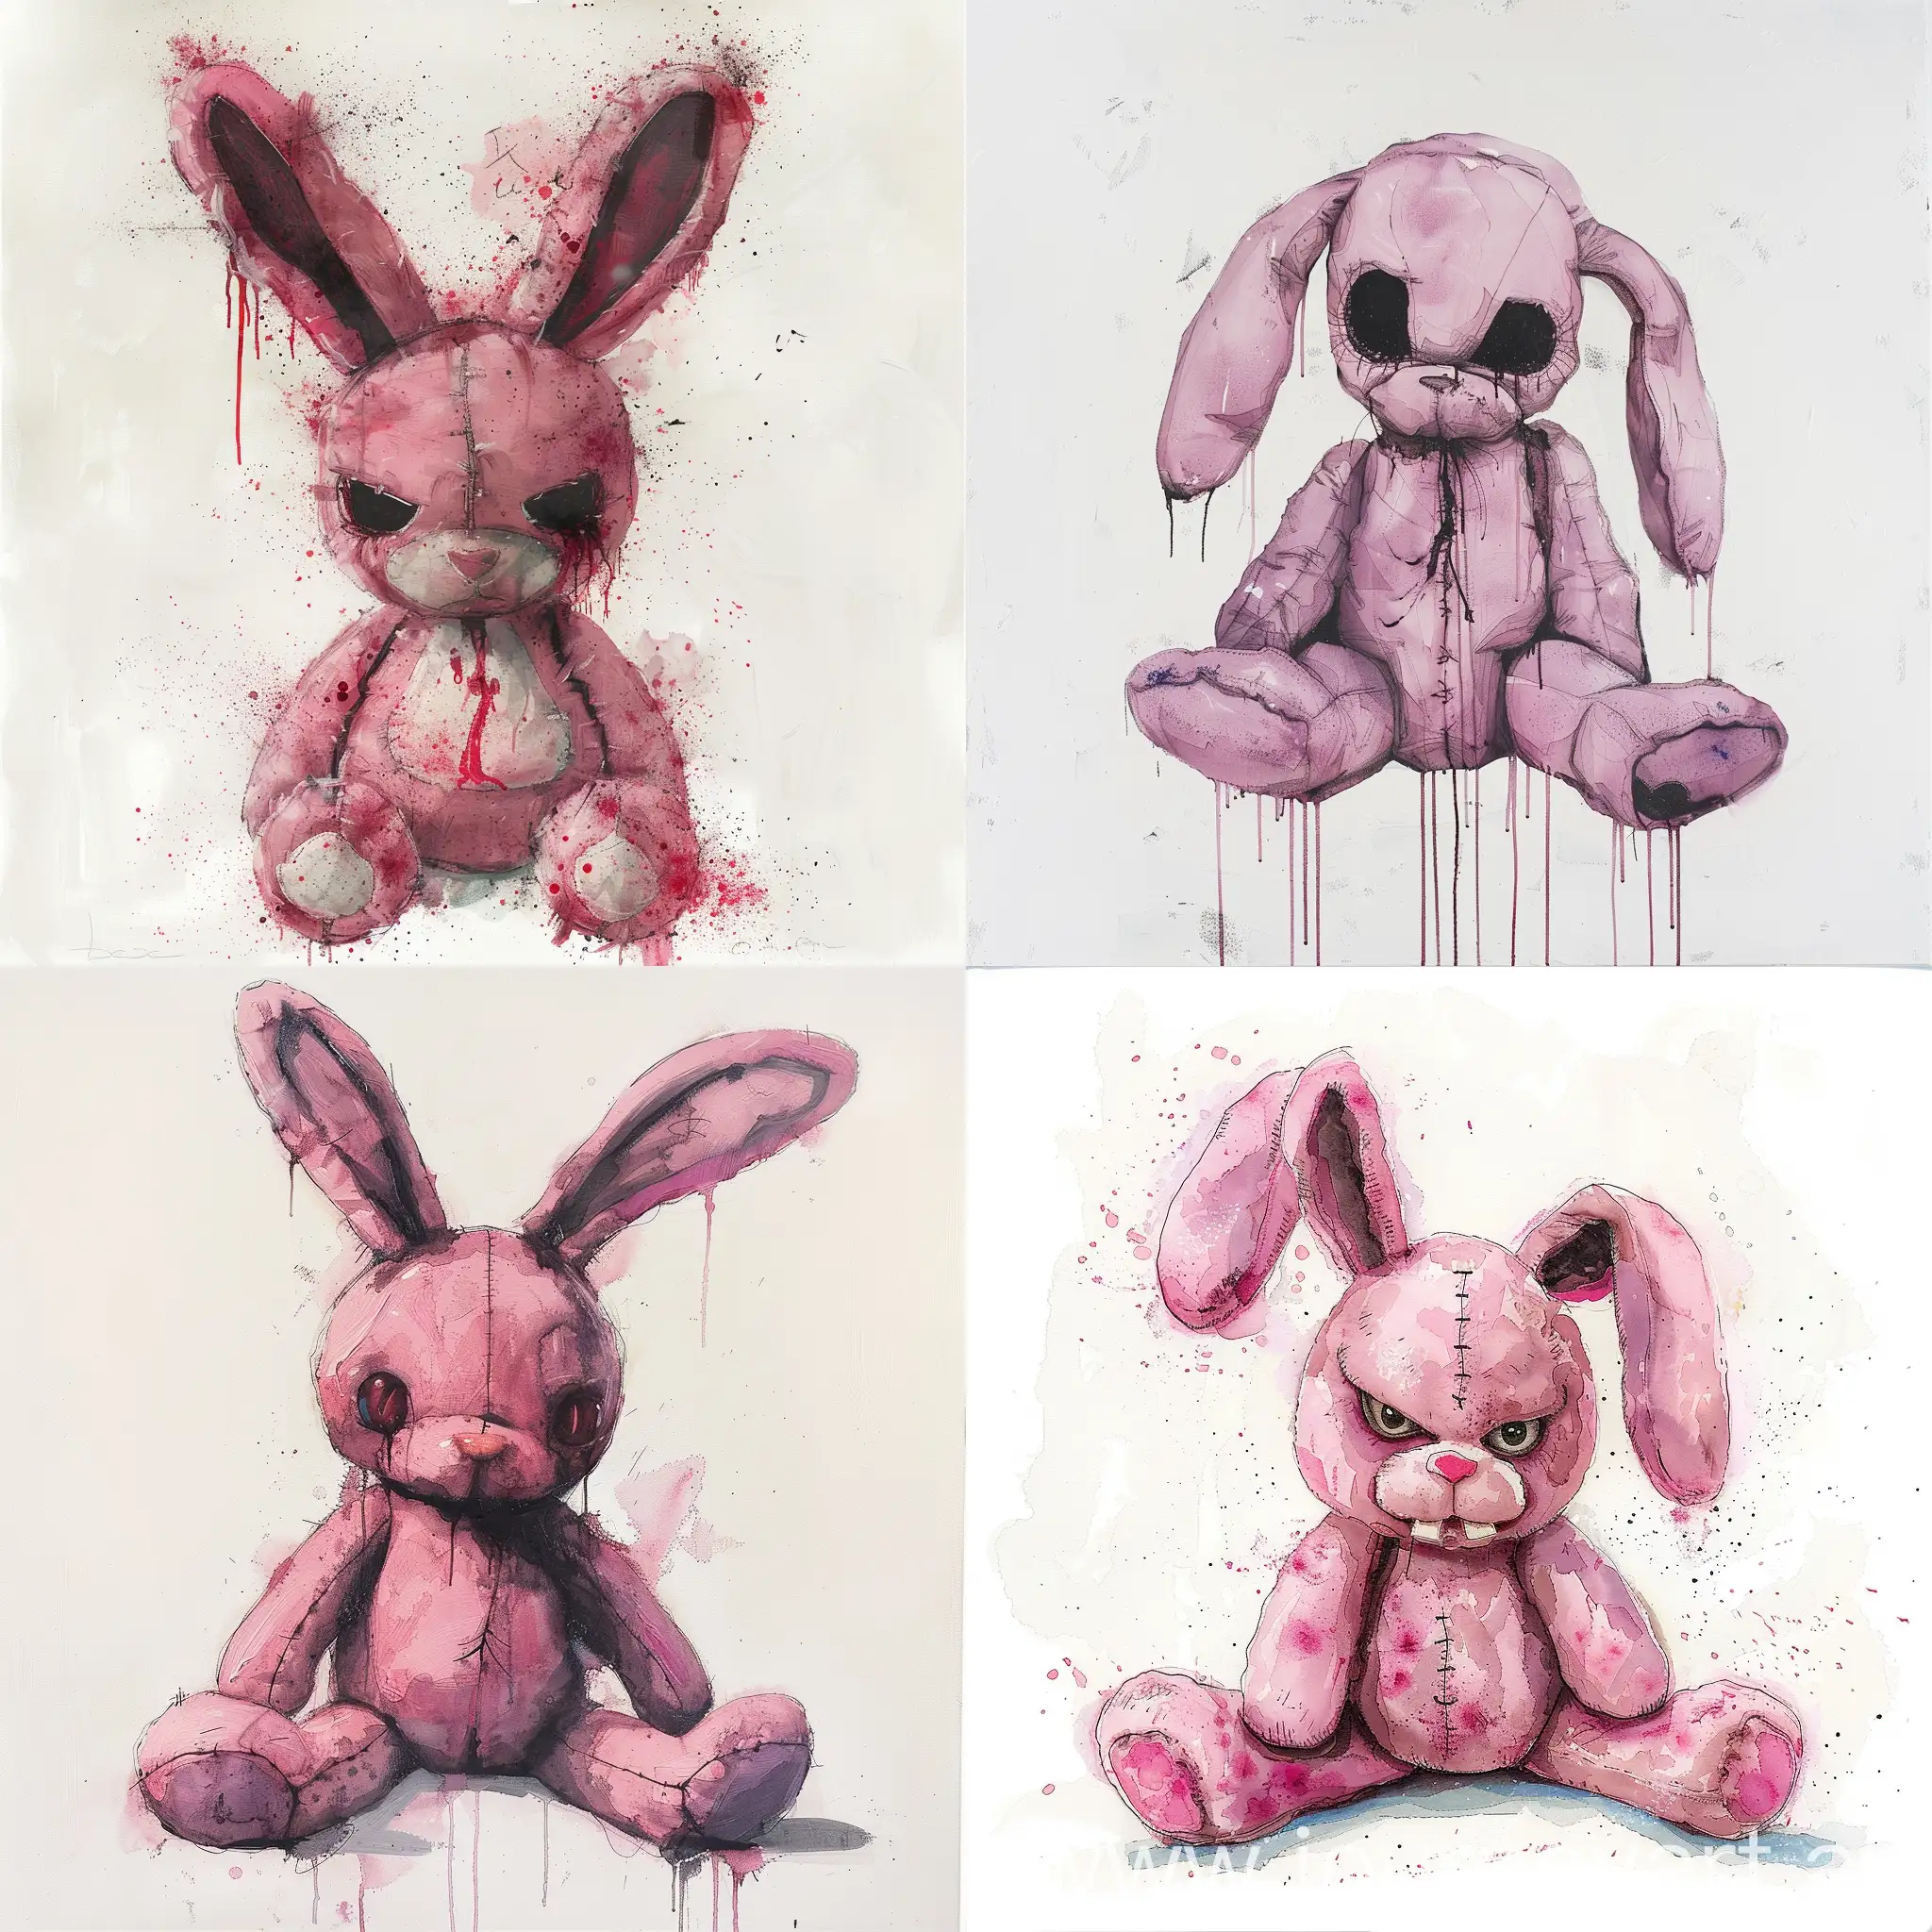 Postmodern-Water-Painting-Evil-Pink-Bunny-Plush-Doll-on-White-Background